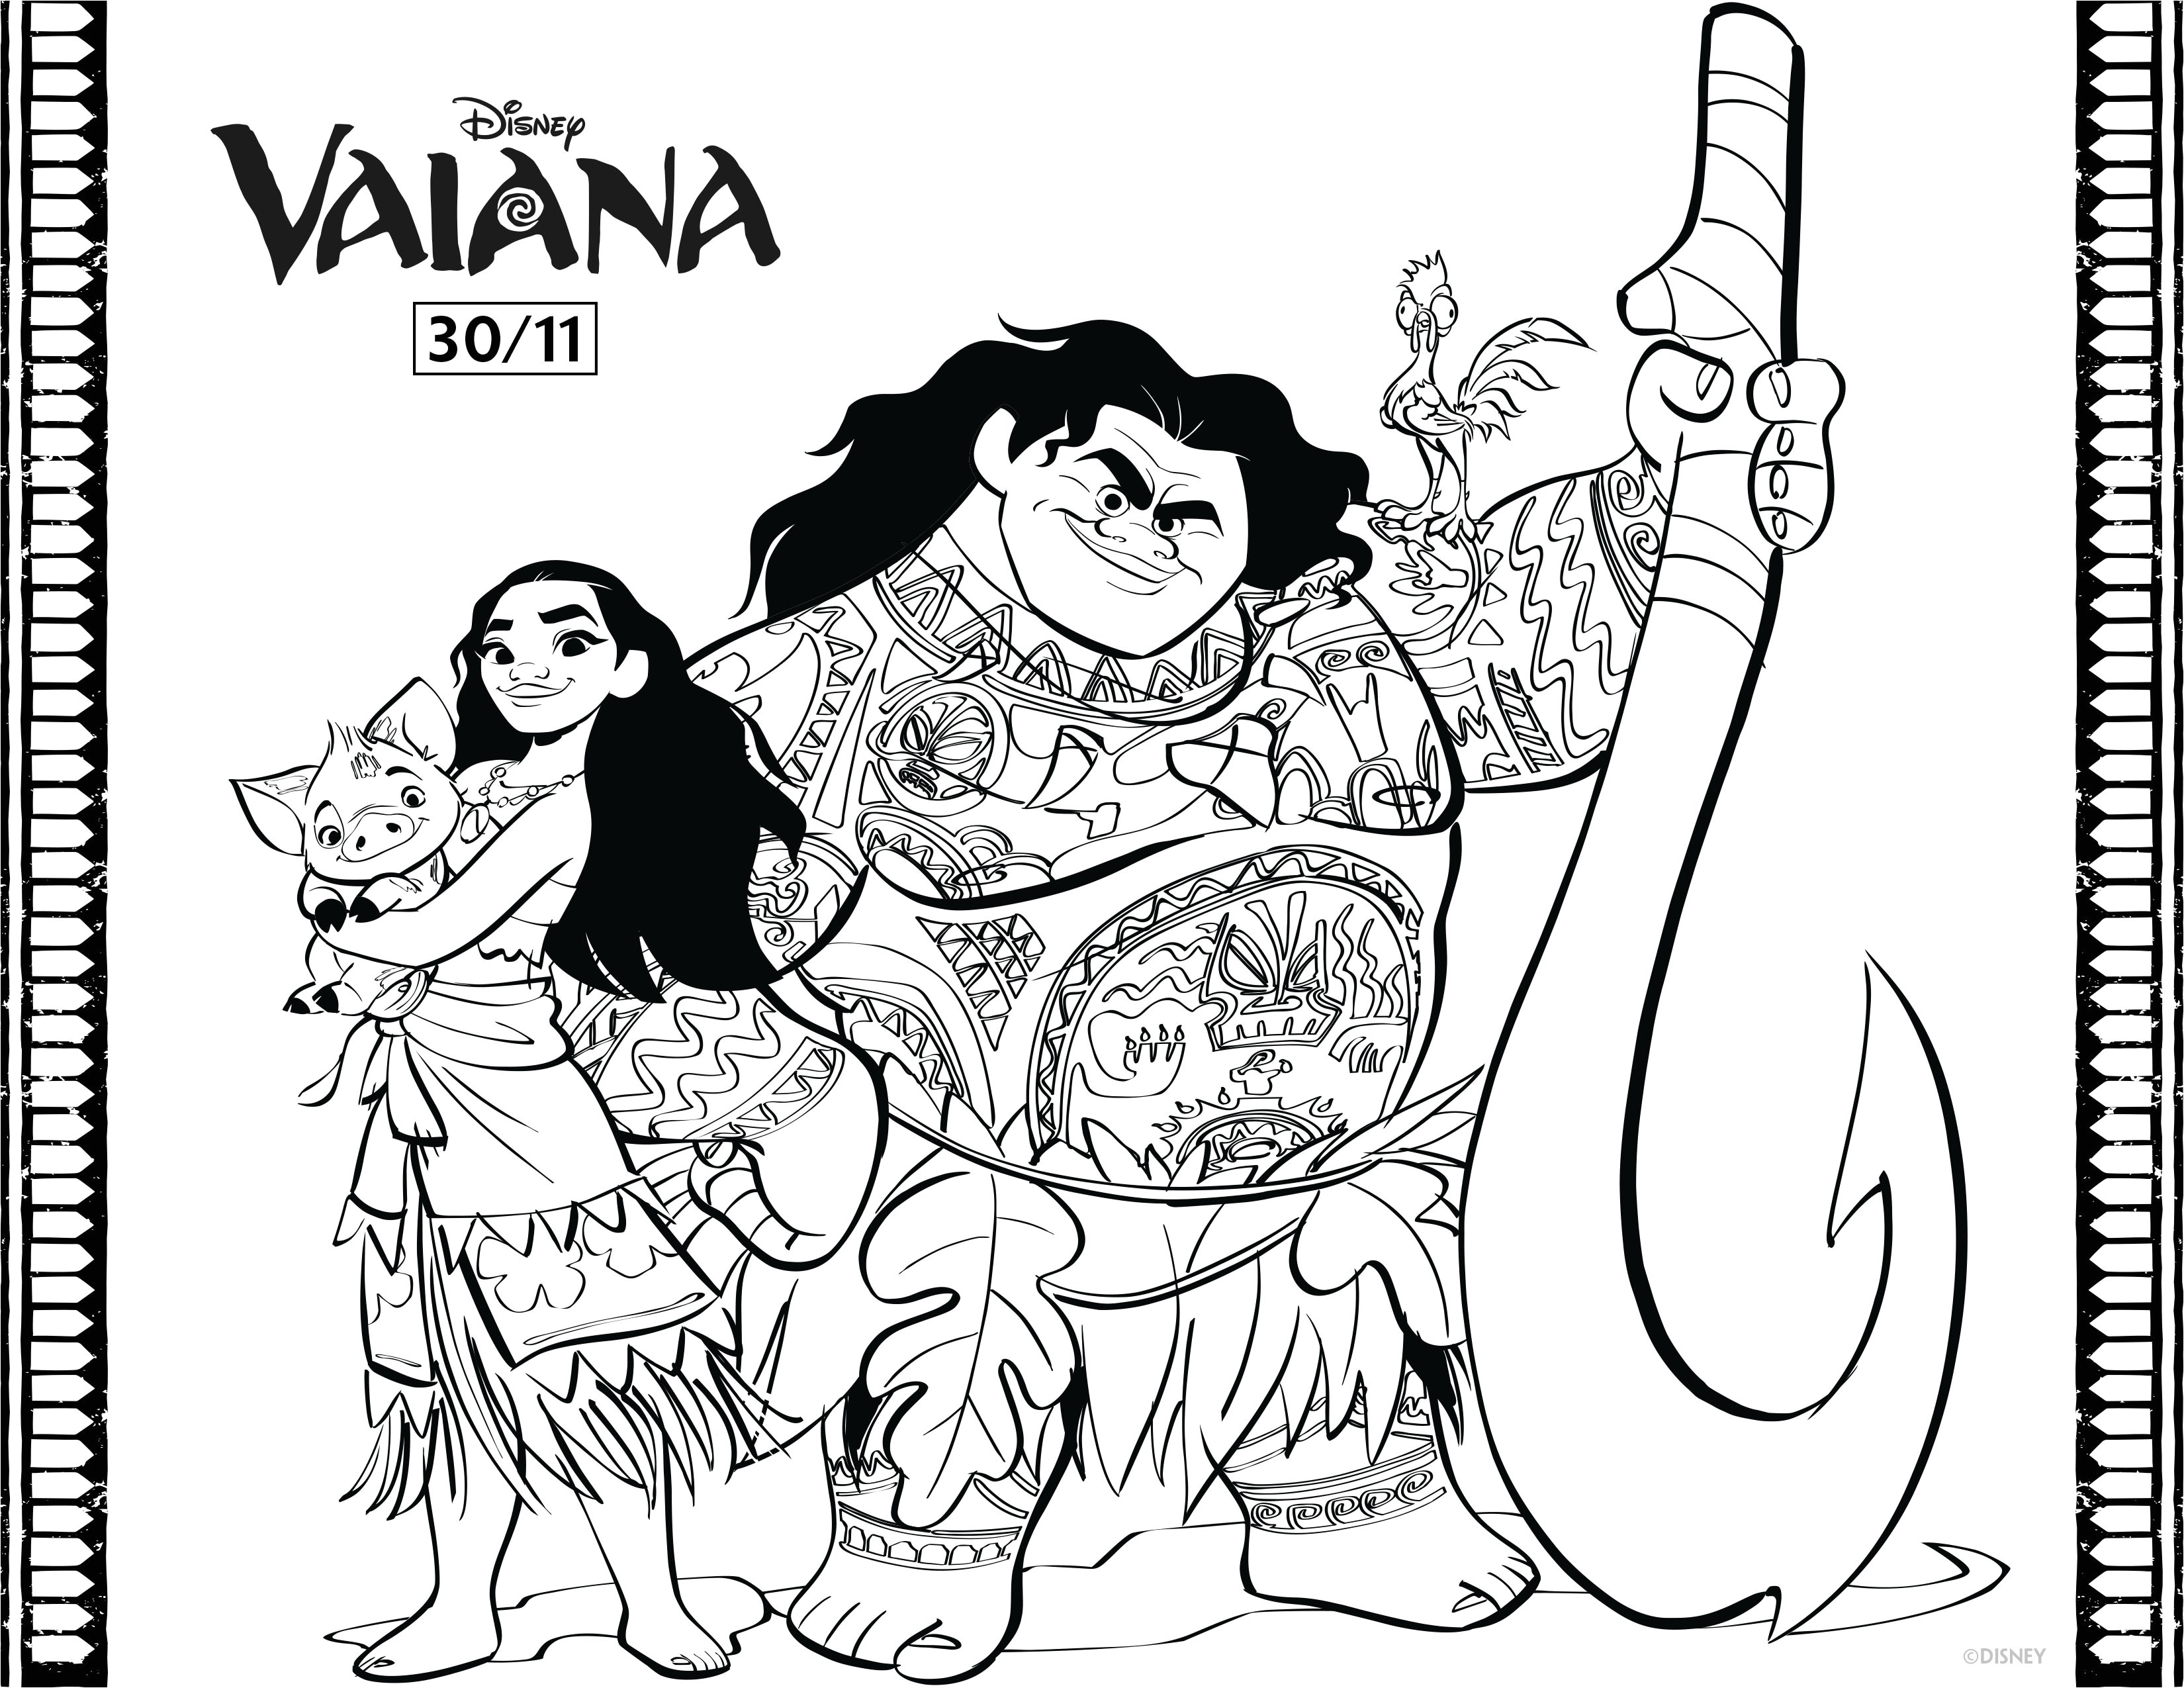 Simple Moana coloring page